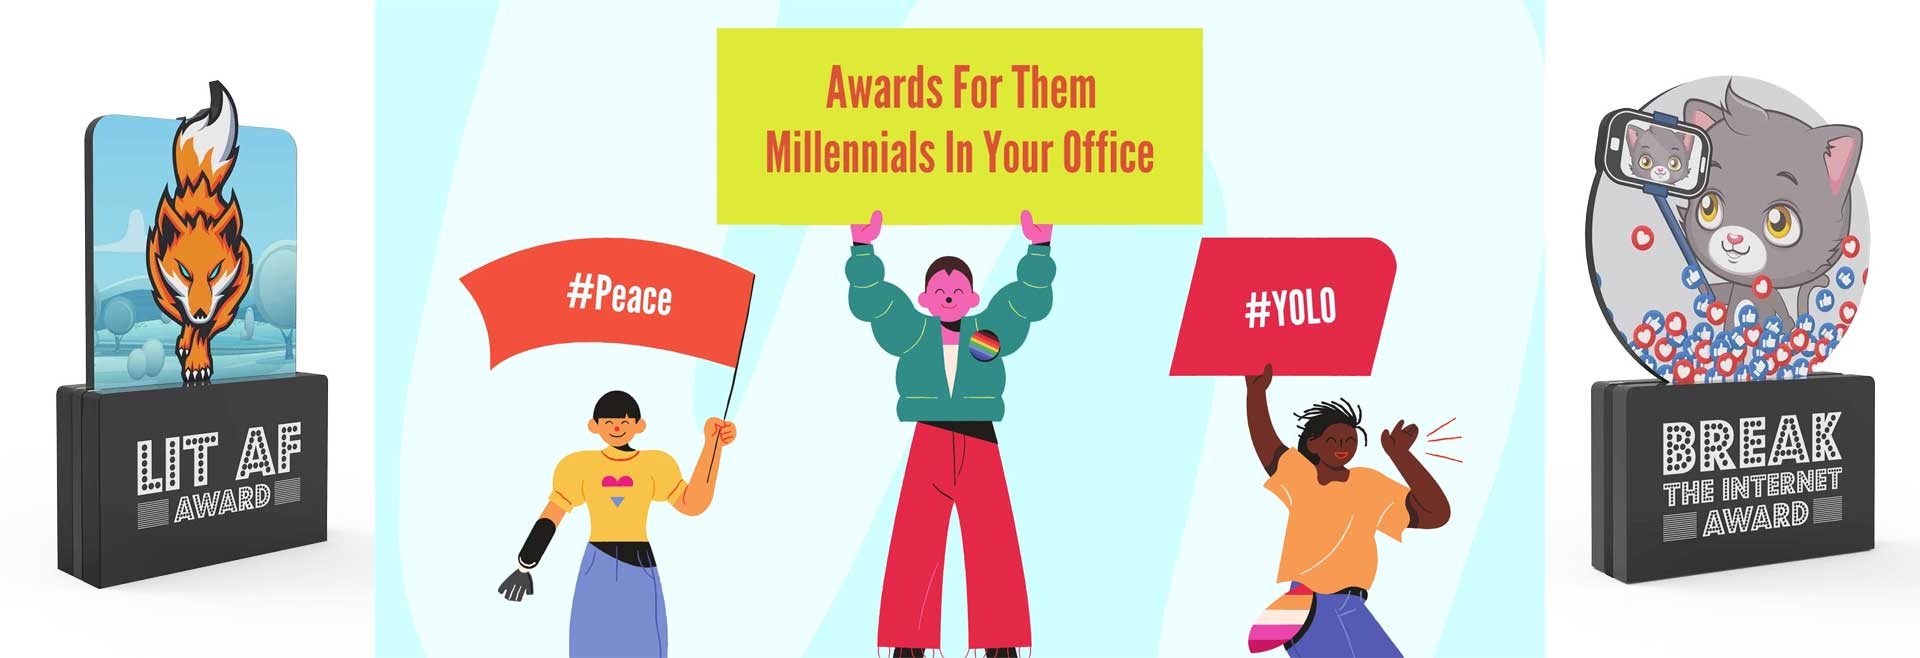 Fun Awards for Millennials in the Workplace